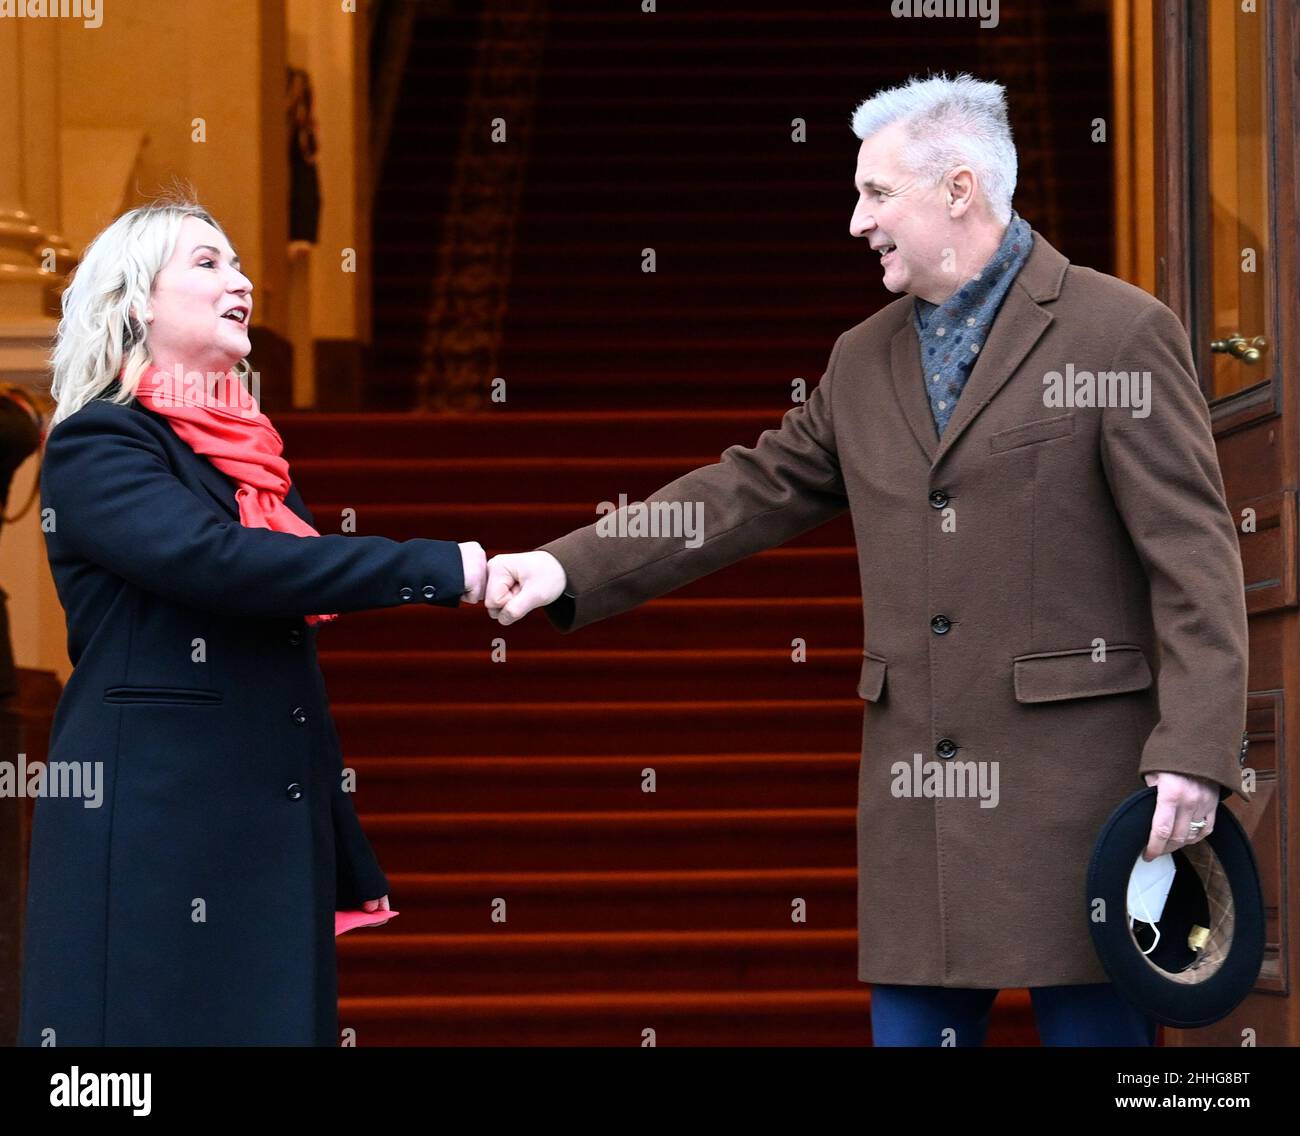 Czech Defence Minister Jana Cernochova (wearing red scarf) welcomes her Latvian counterpart Artis Pabriks in Prague, Czech Republic, on Monday, January 24, 2022. (CTK Photo/Michal Krumphanzl) Stock Photo